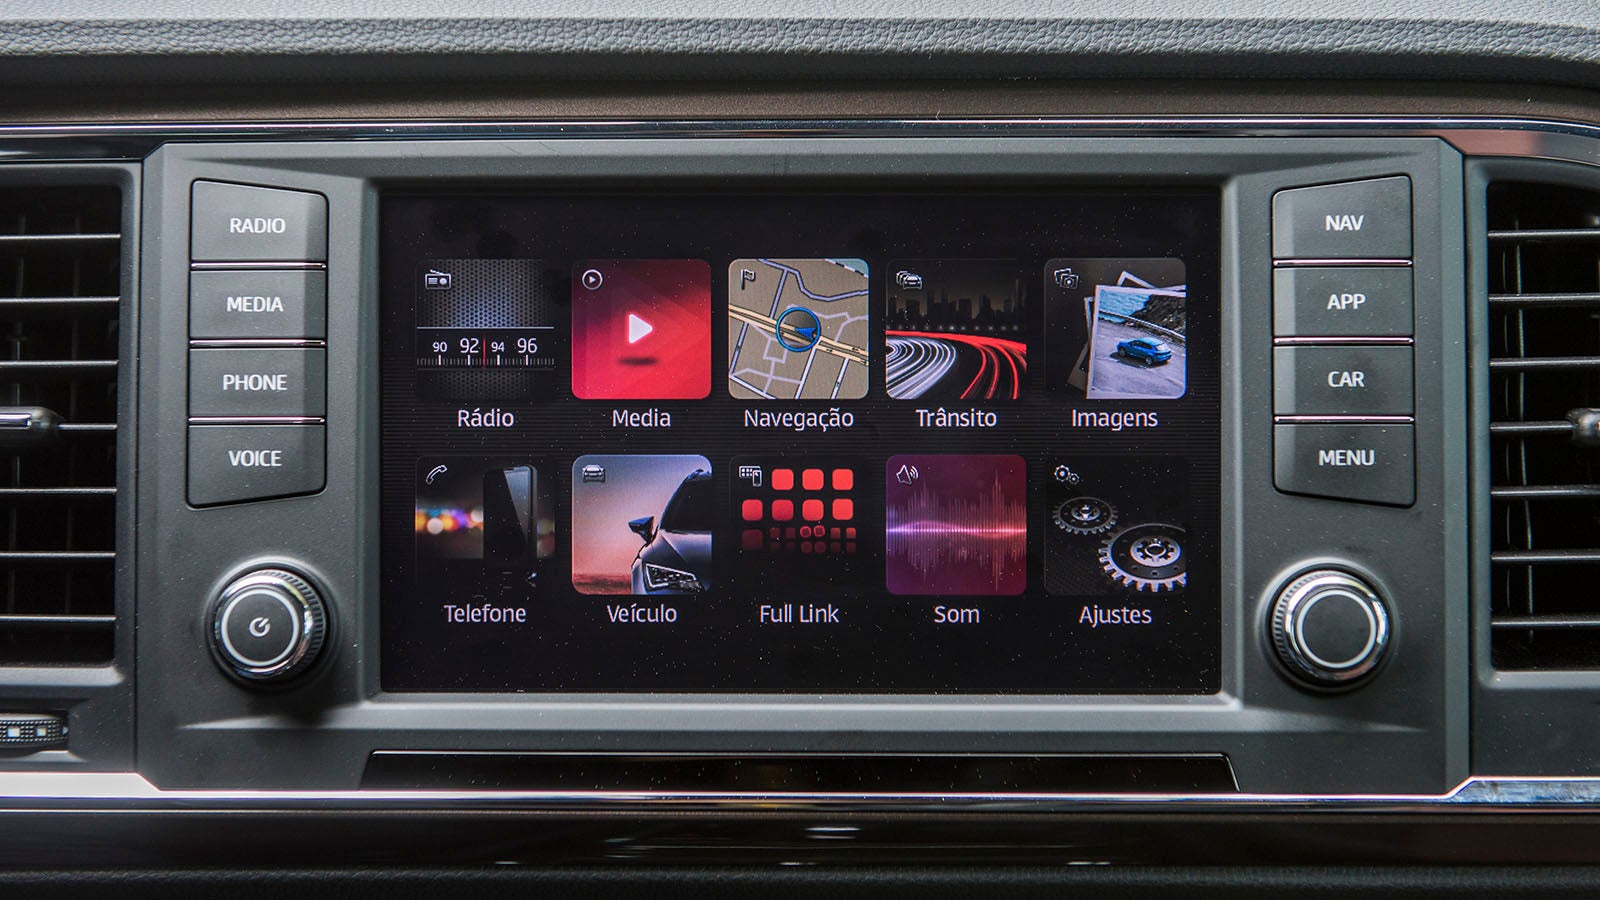 SEAT Ateca review image infotainment system